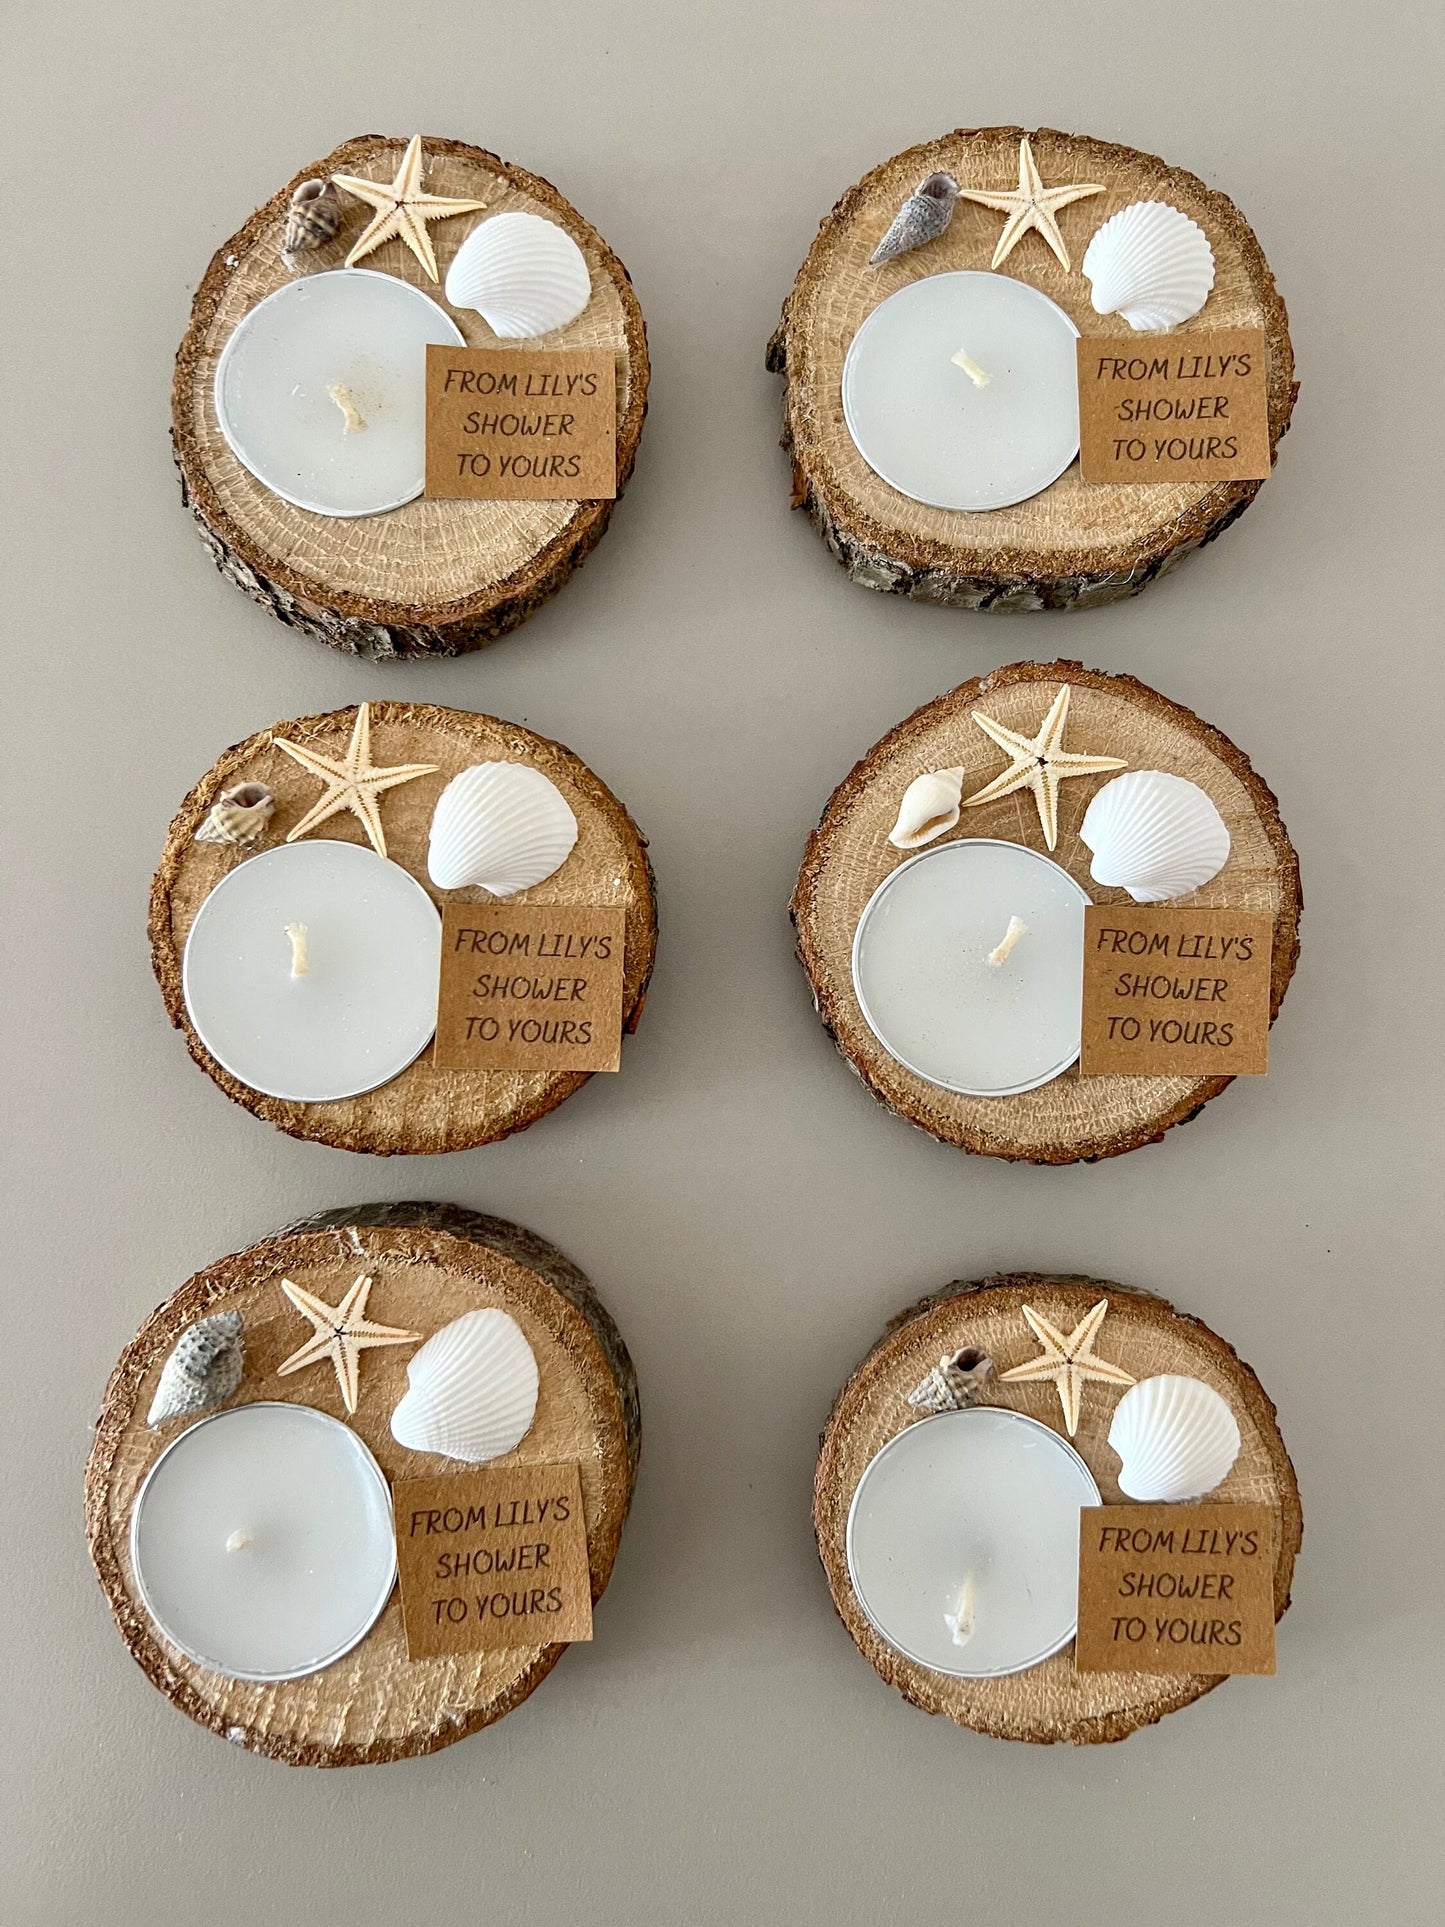 Personalized Wood Tealight Candle Holder | Unique Baby Shower Favors | Wedding Candles Favors | Bridal Shower Favors | Wedding Sea Decors